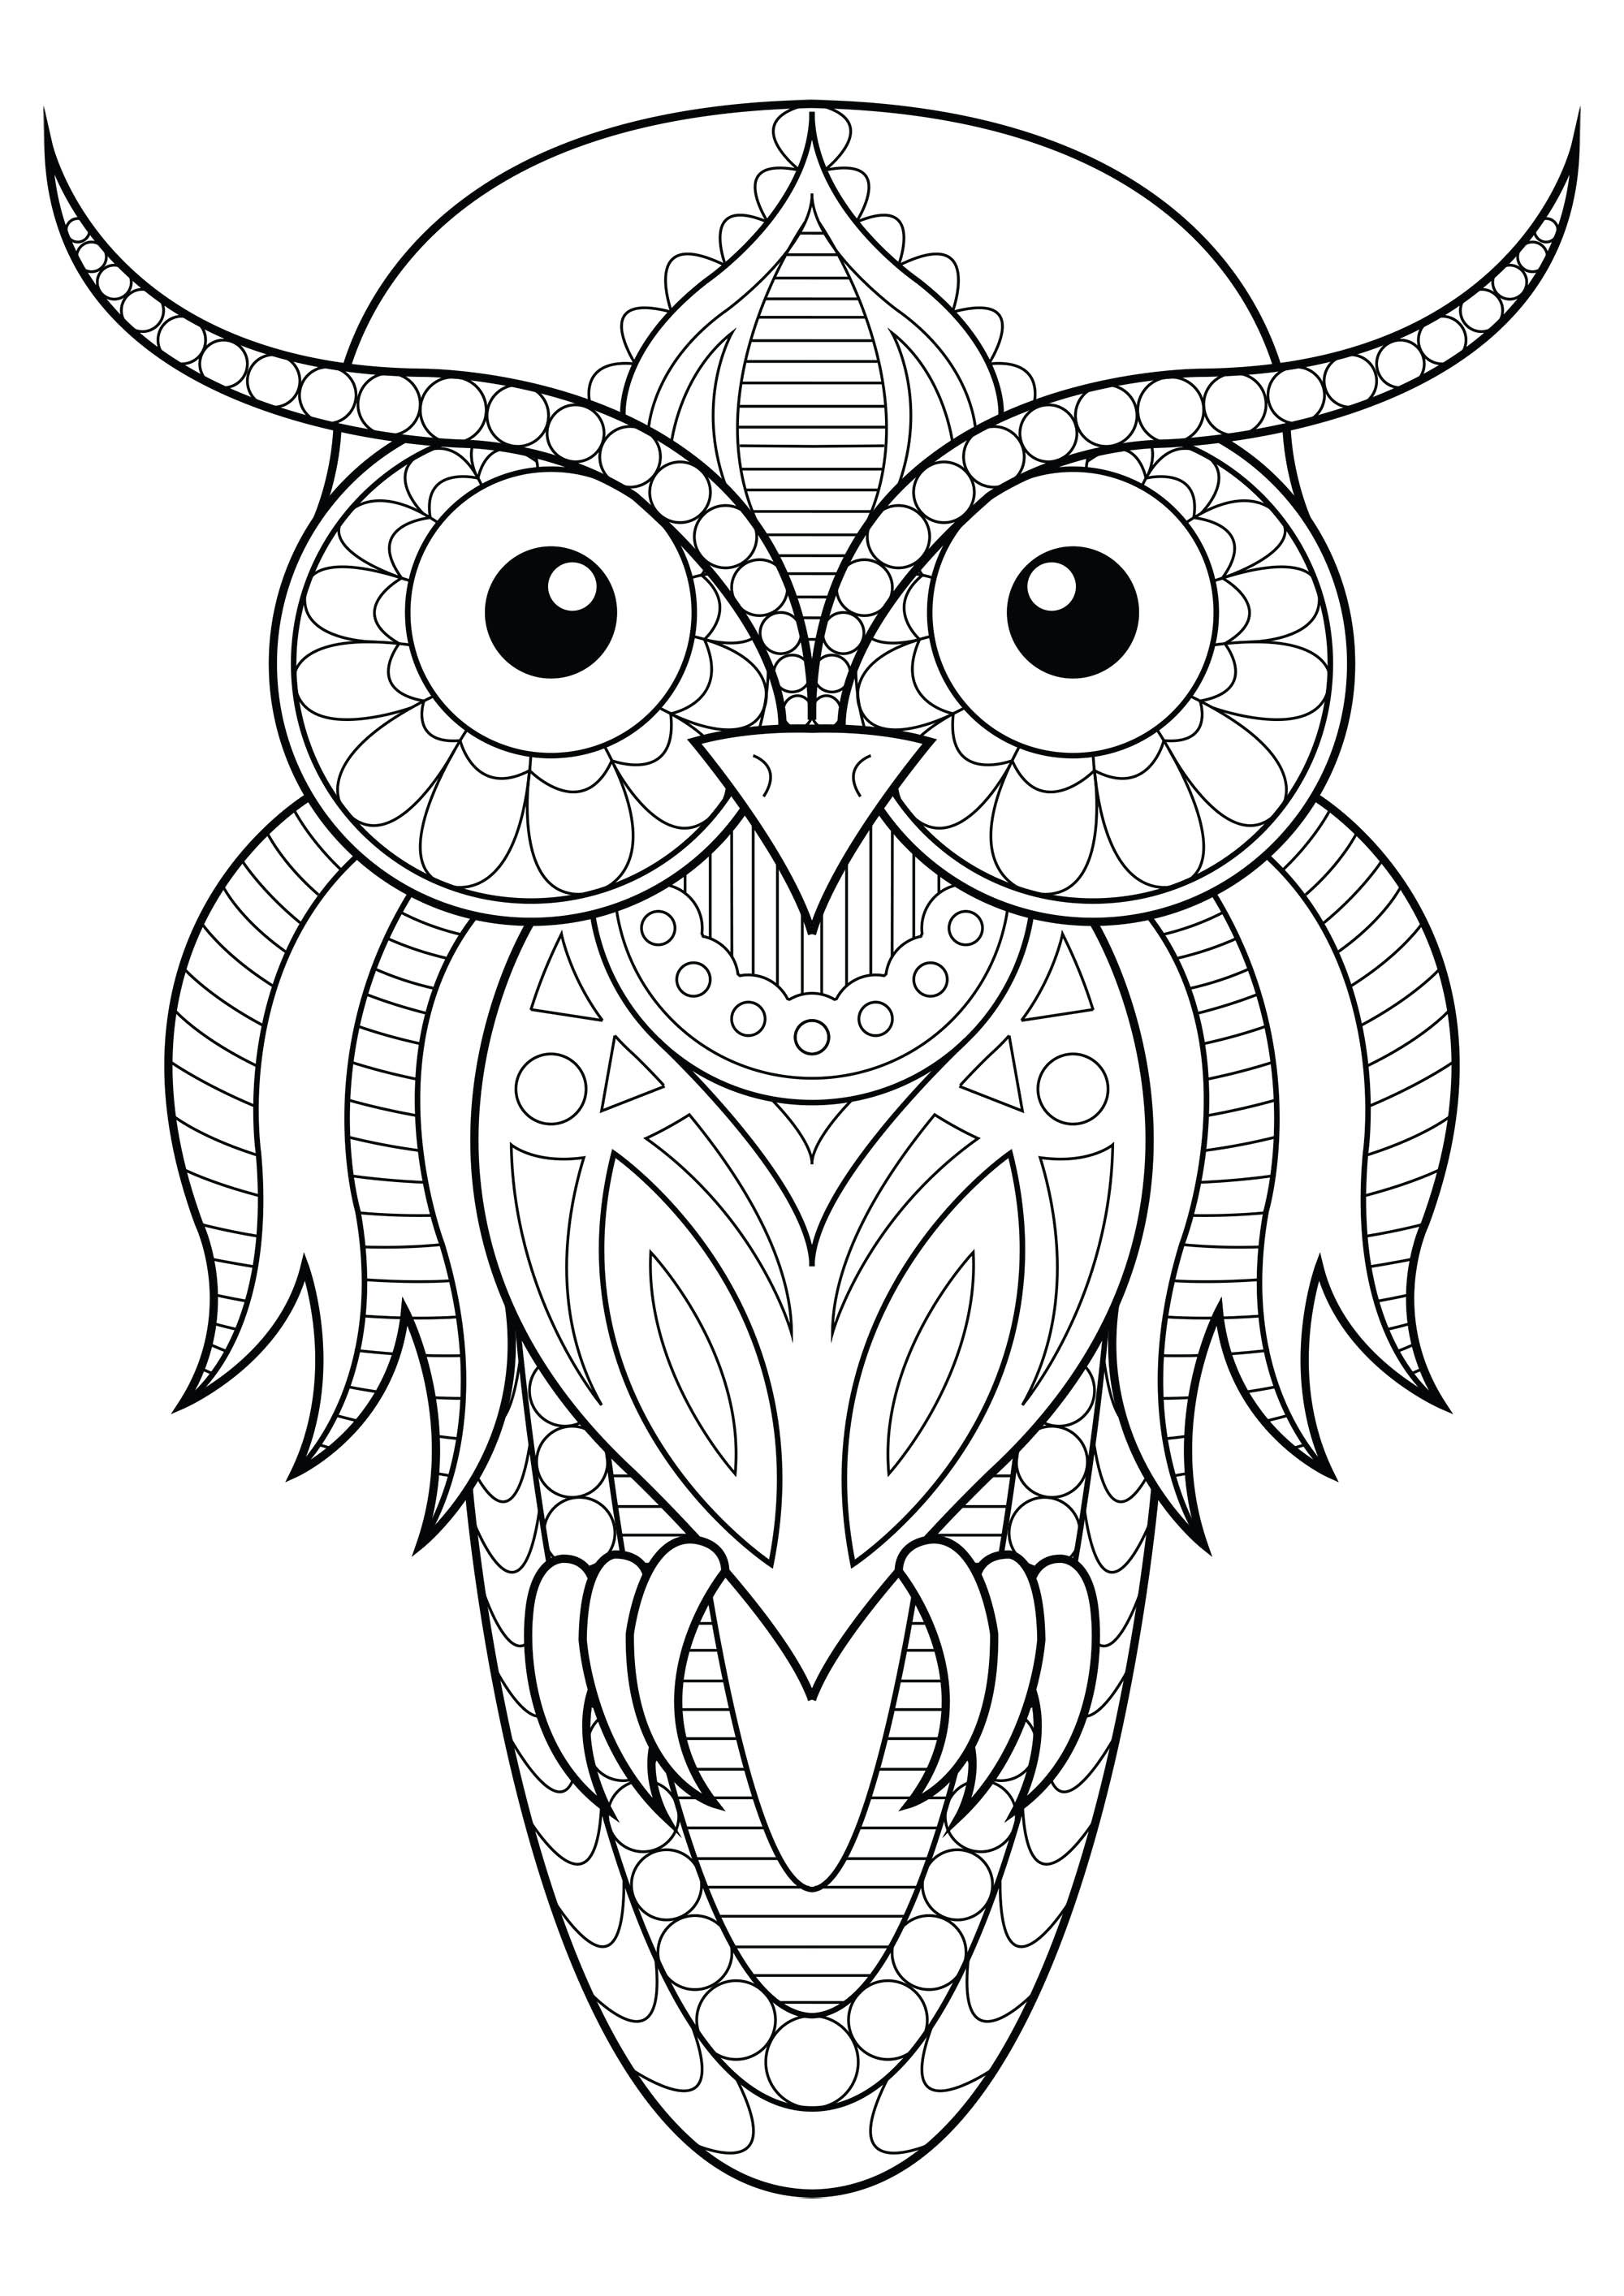 Owl simple patterns - 1 - Owls Adult Coloring Pages